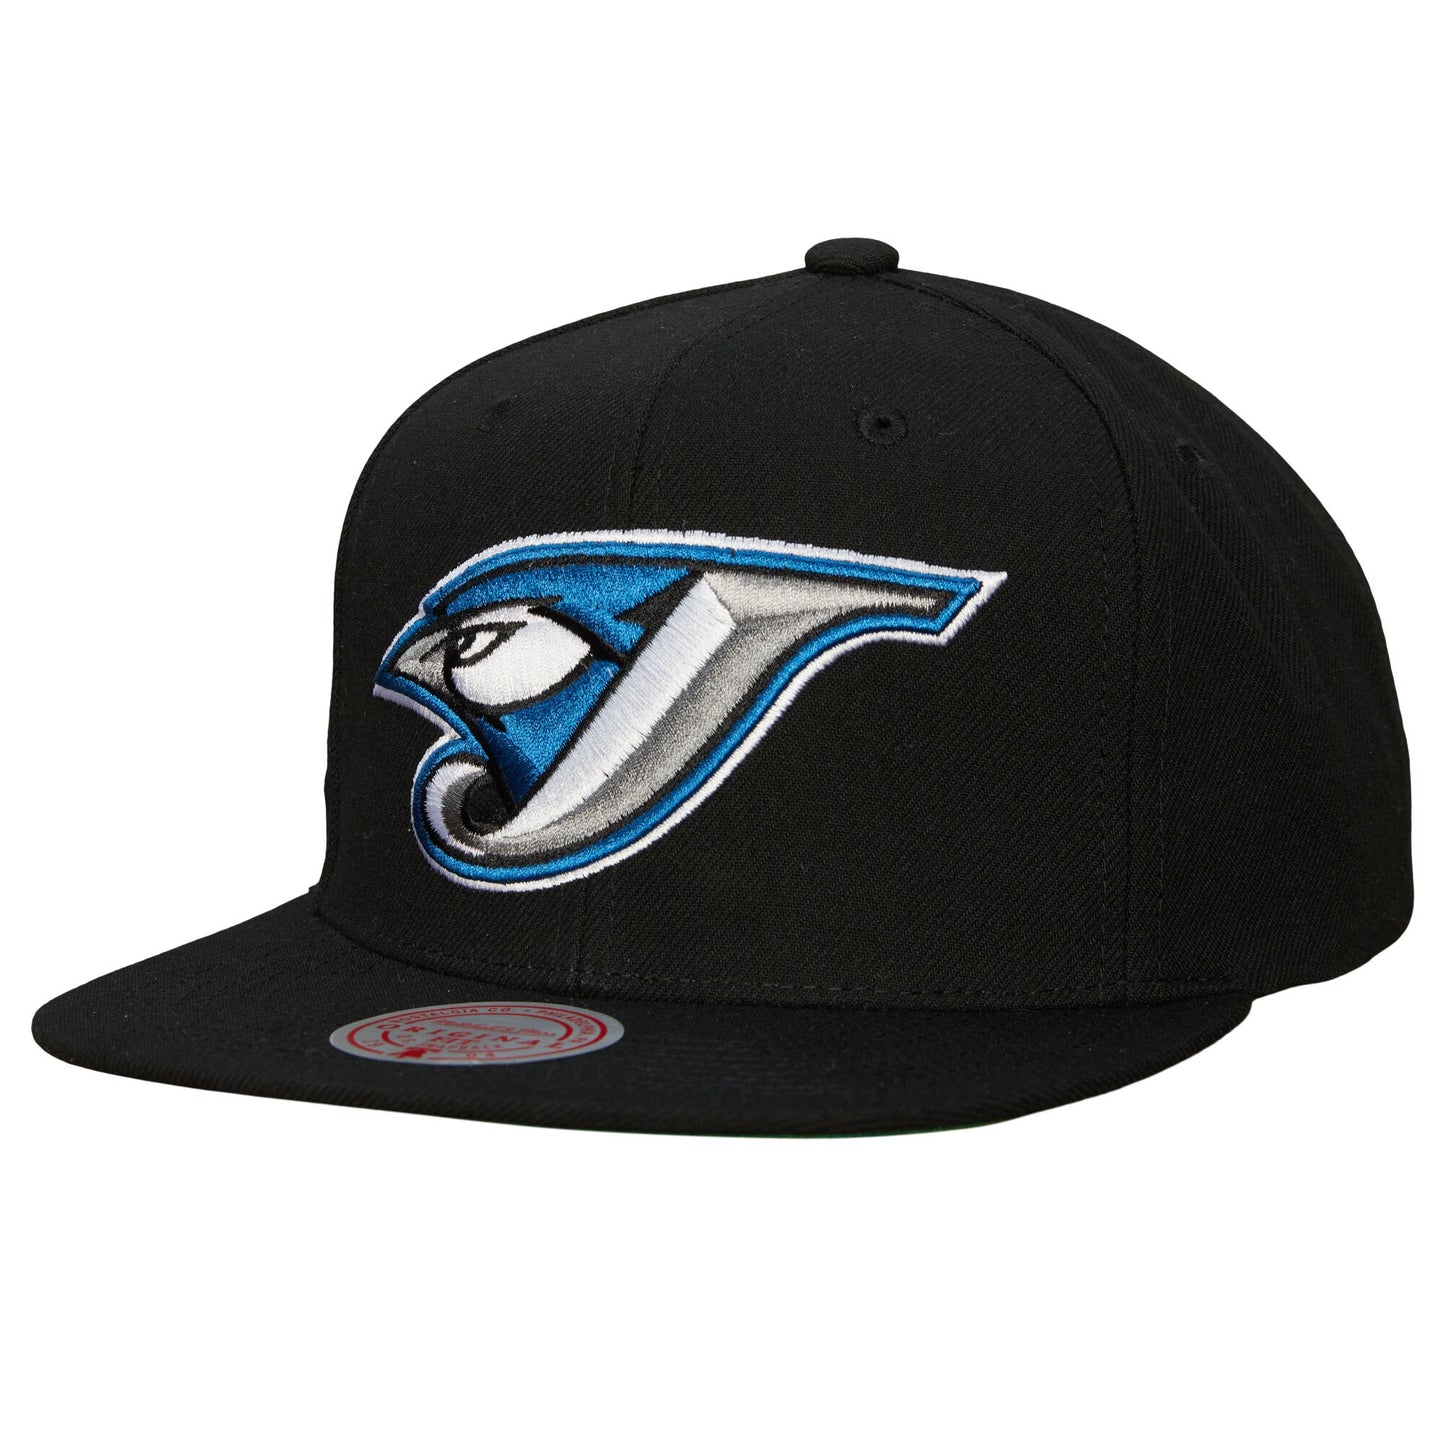 Toronto Blue Jays Mitchell & Ness Cooperstown Collection Evergreen Snapback Hat - Black